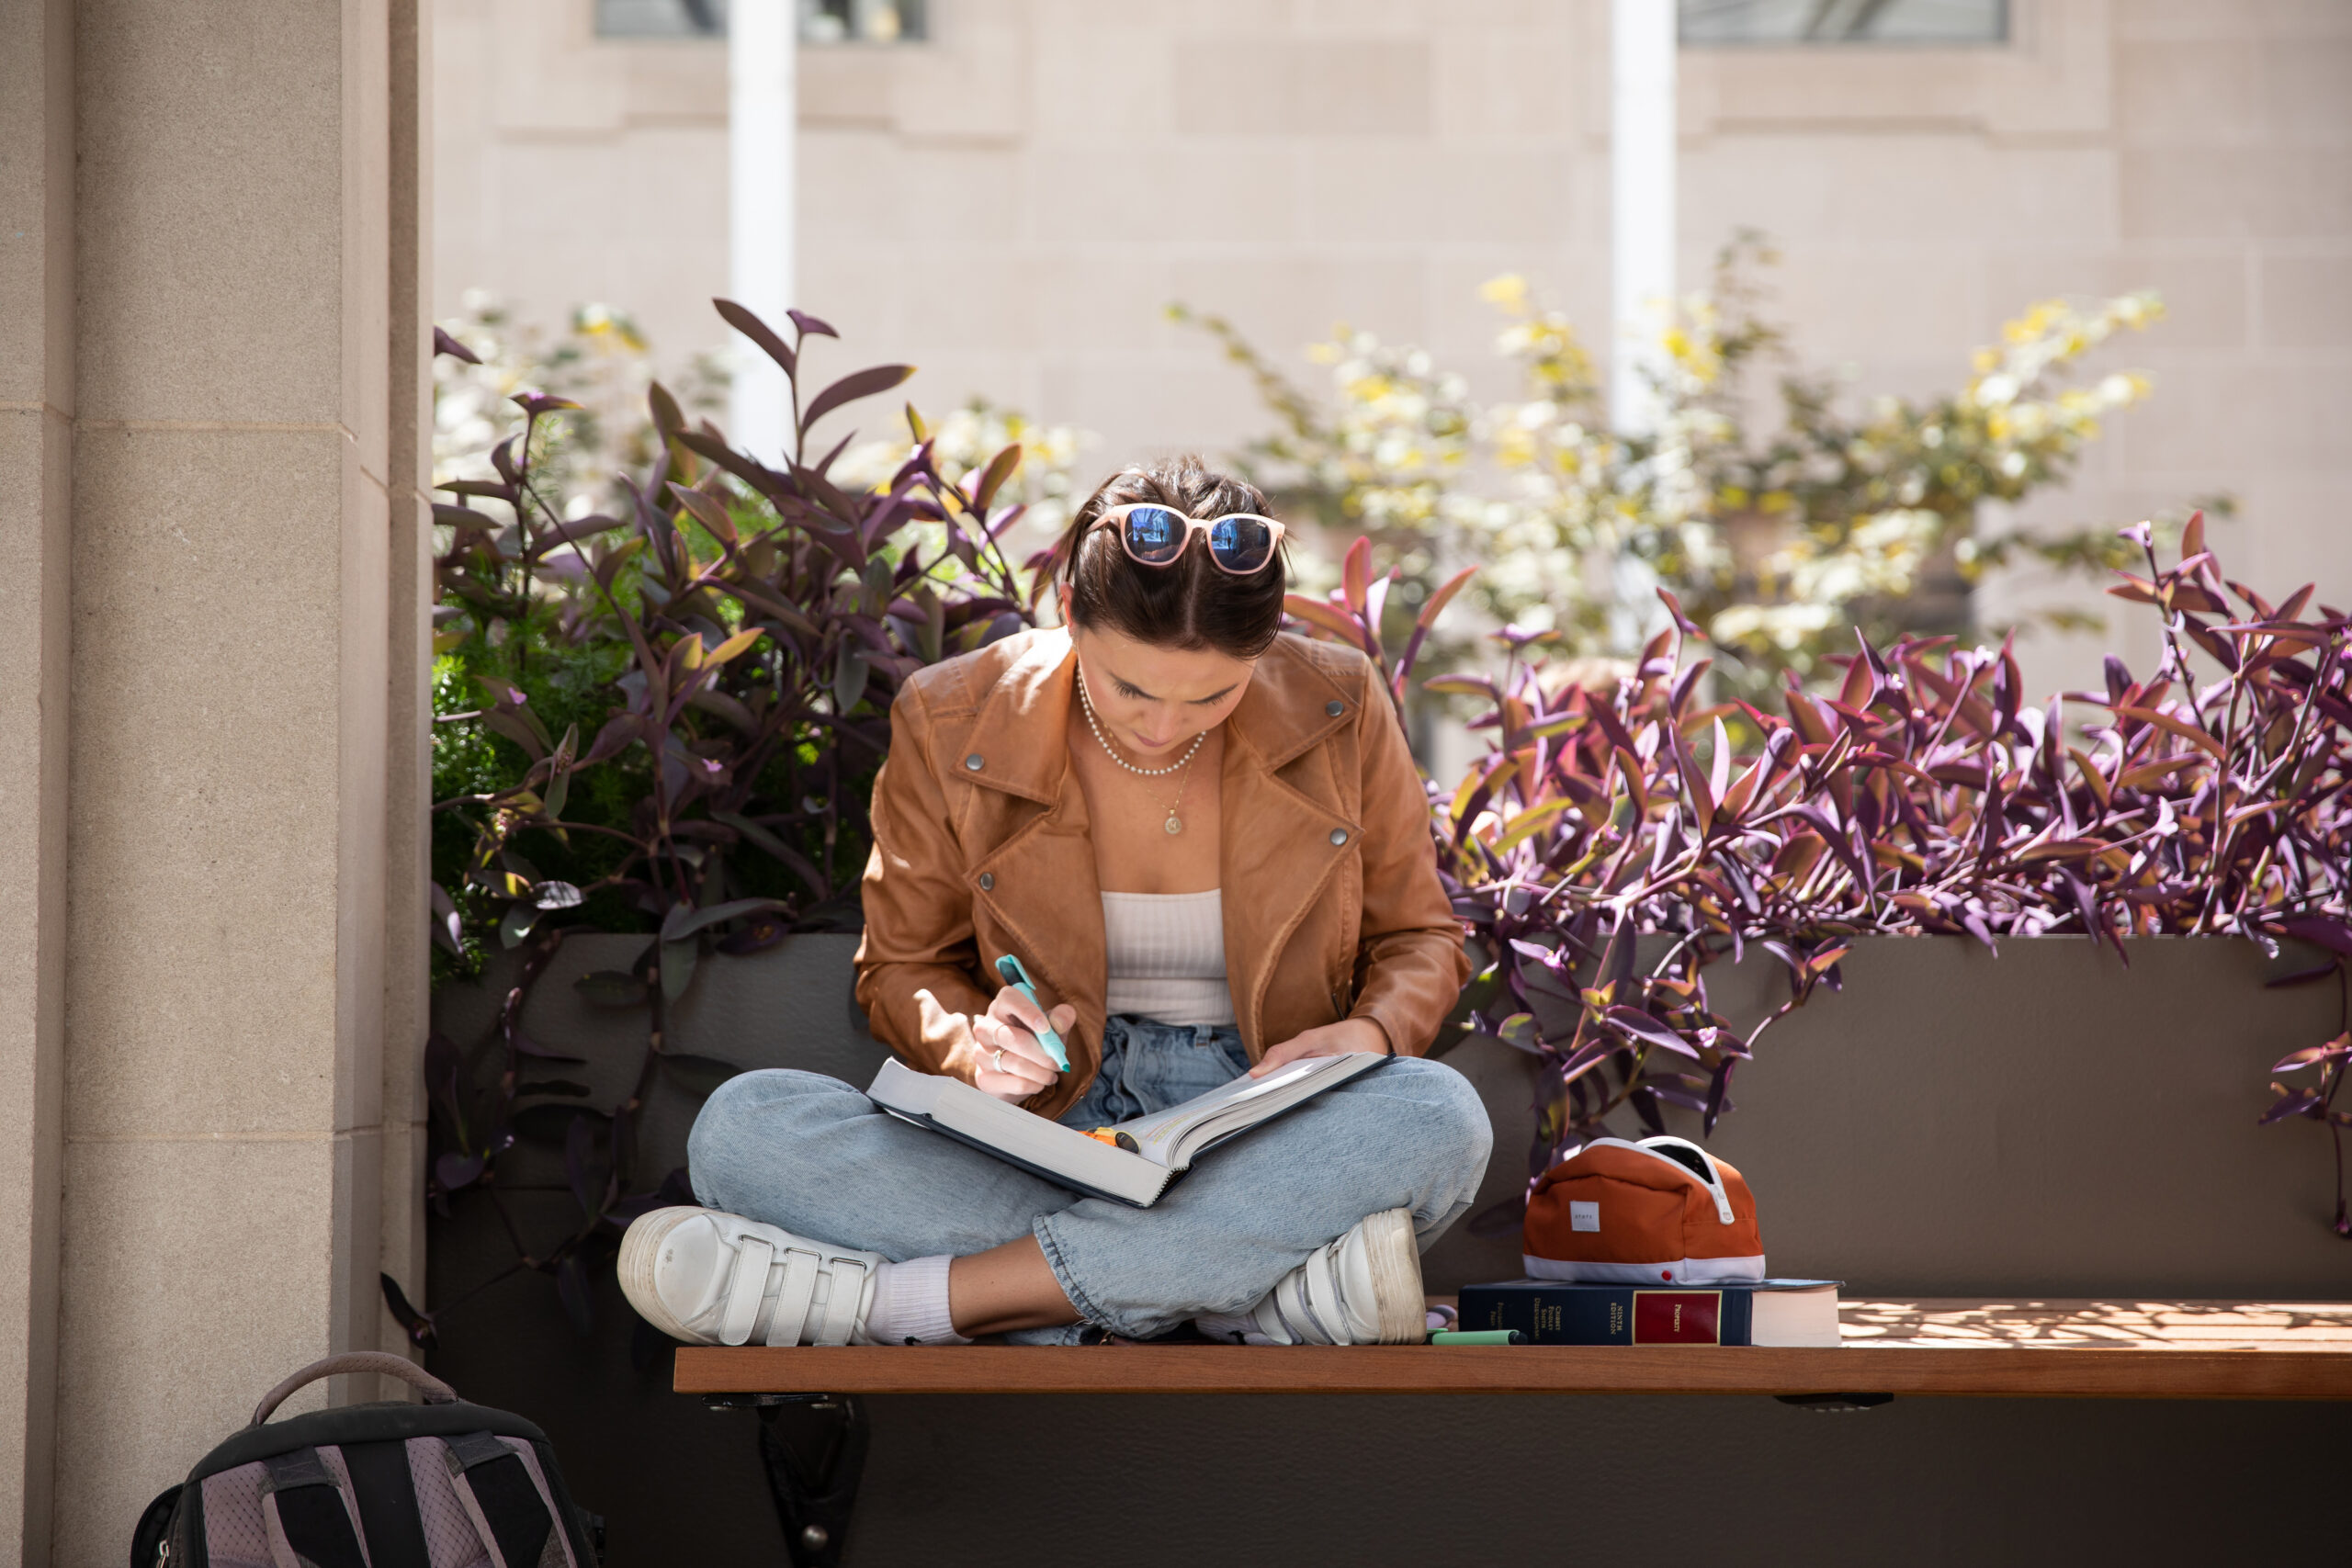 A woman in a brown jacket, blue jeans, and white sneakers sits cross-legged in the courtyard, studying a law book